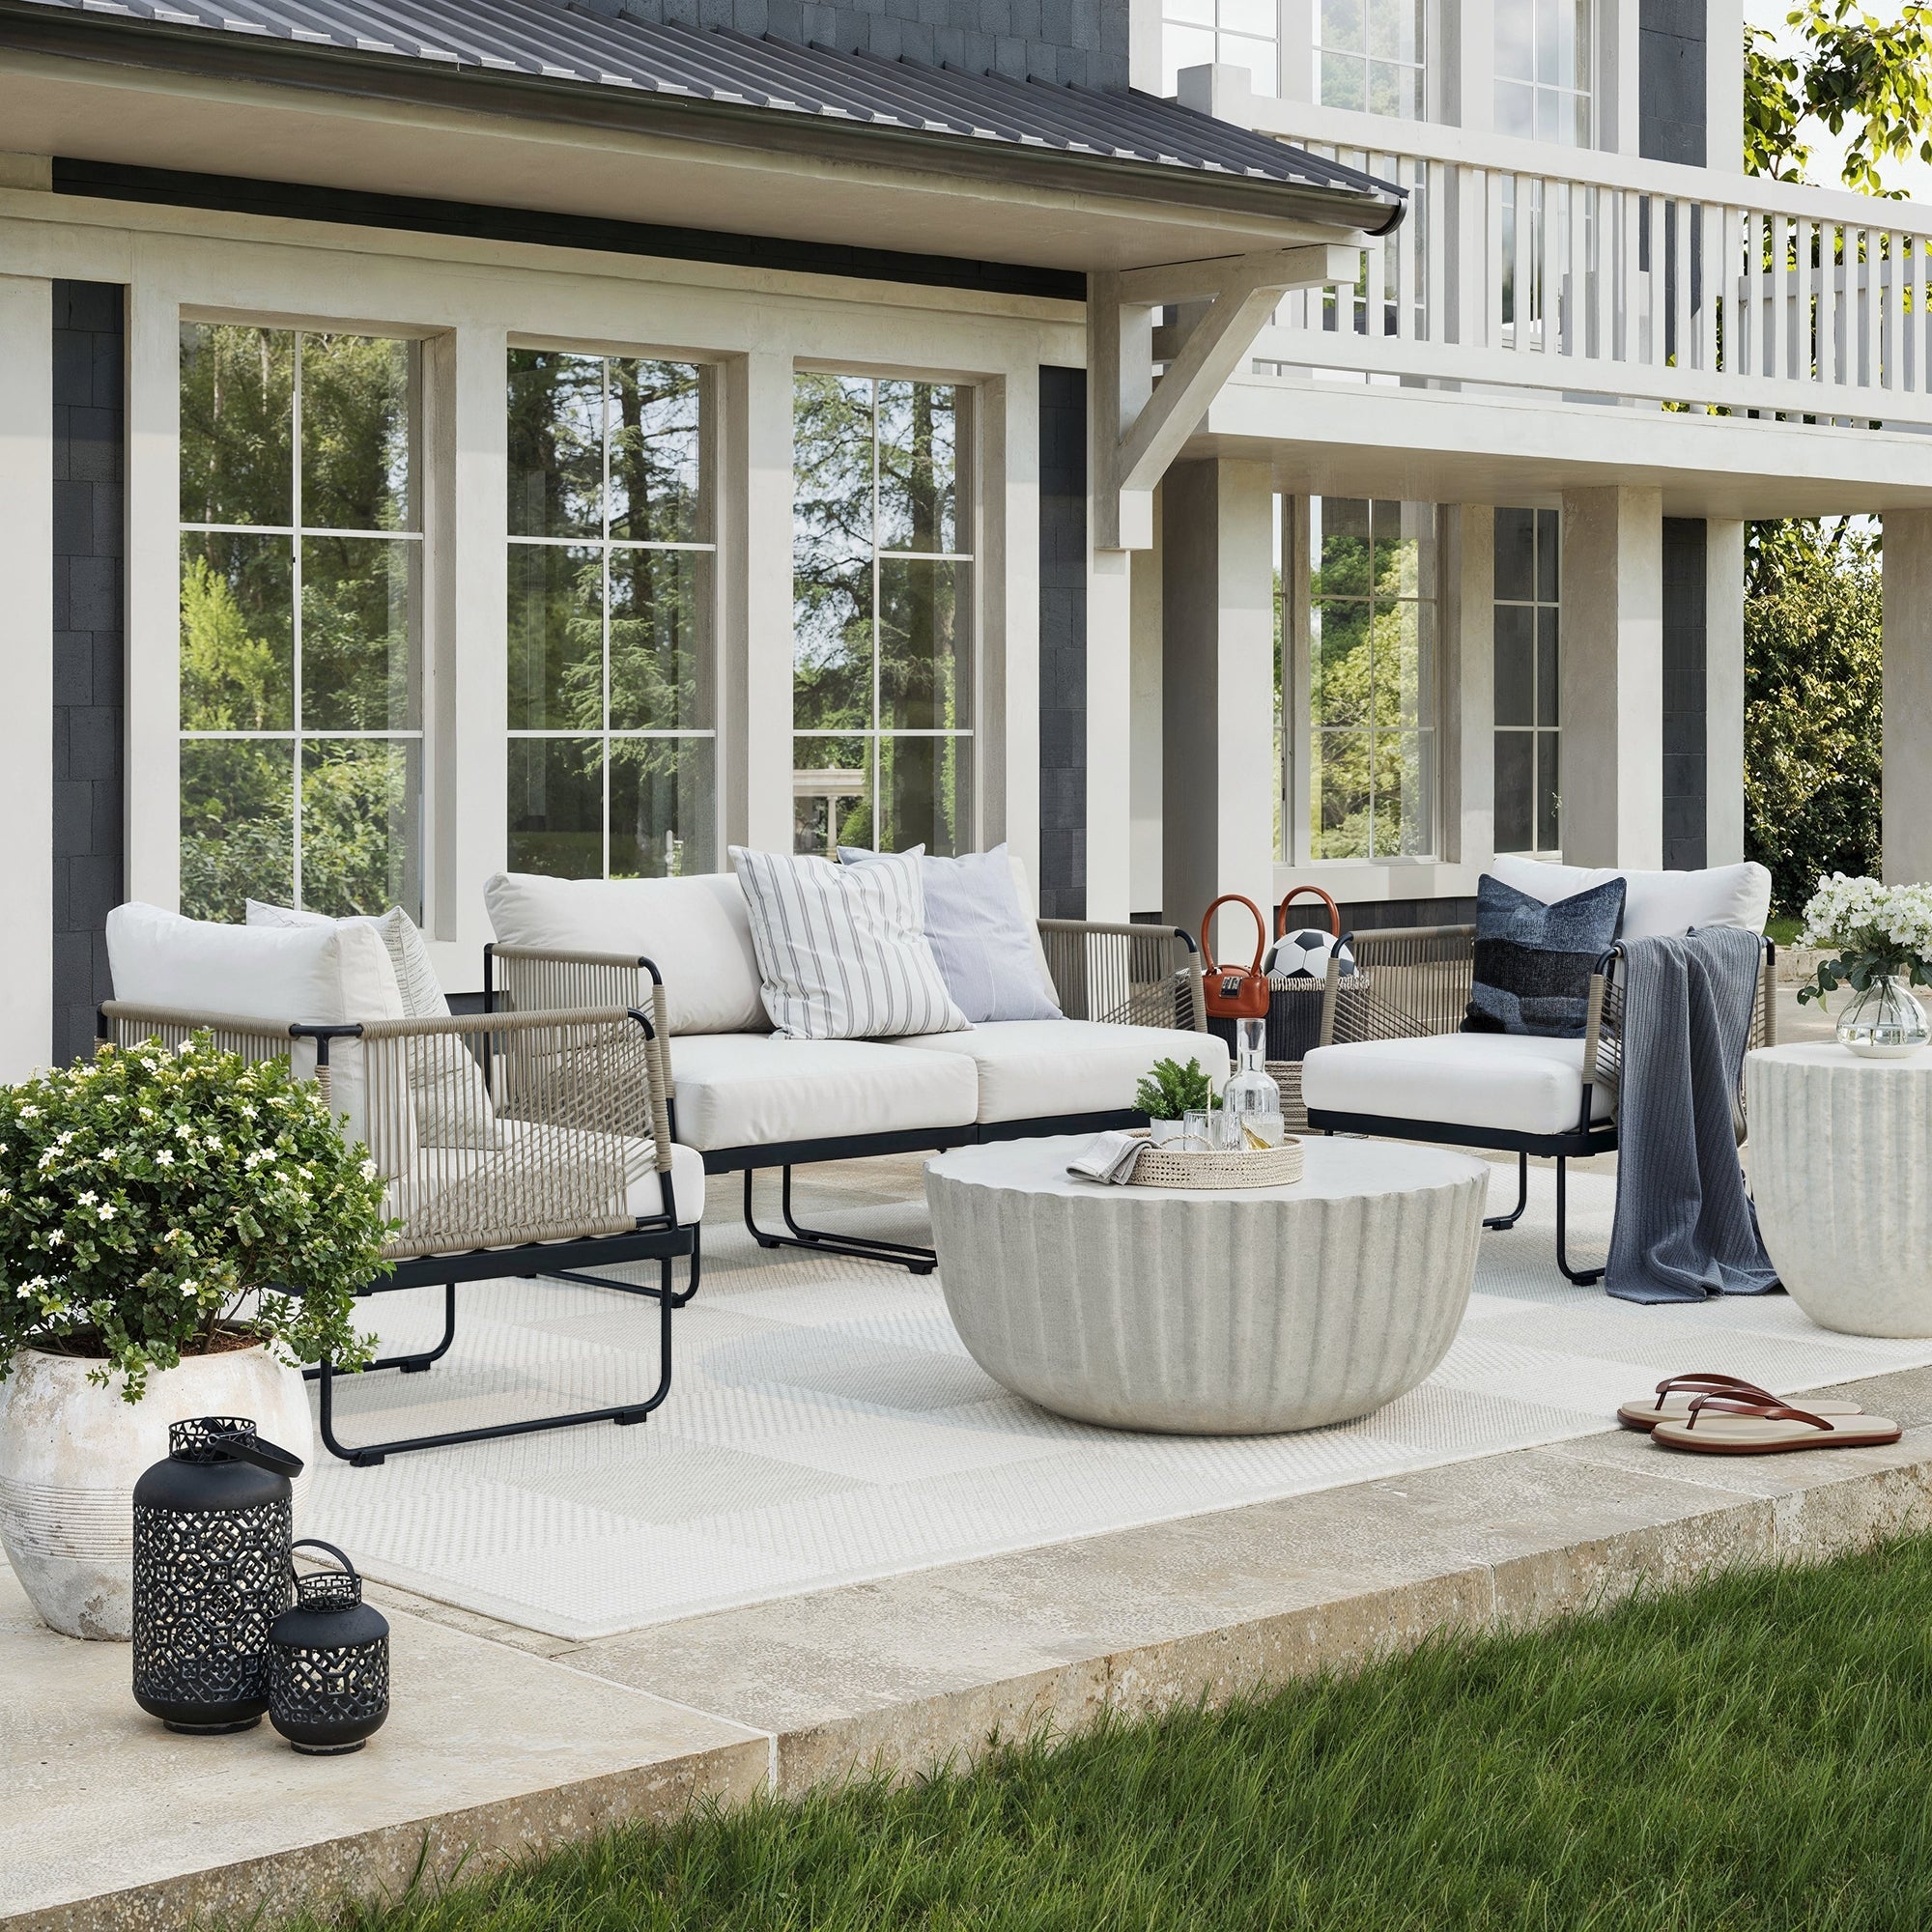 Set of 2 Outdoor Patio Cord Loveseats White